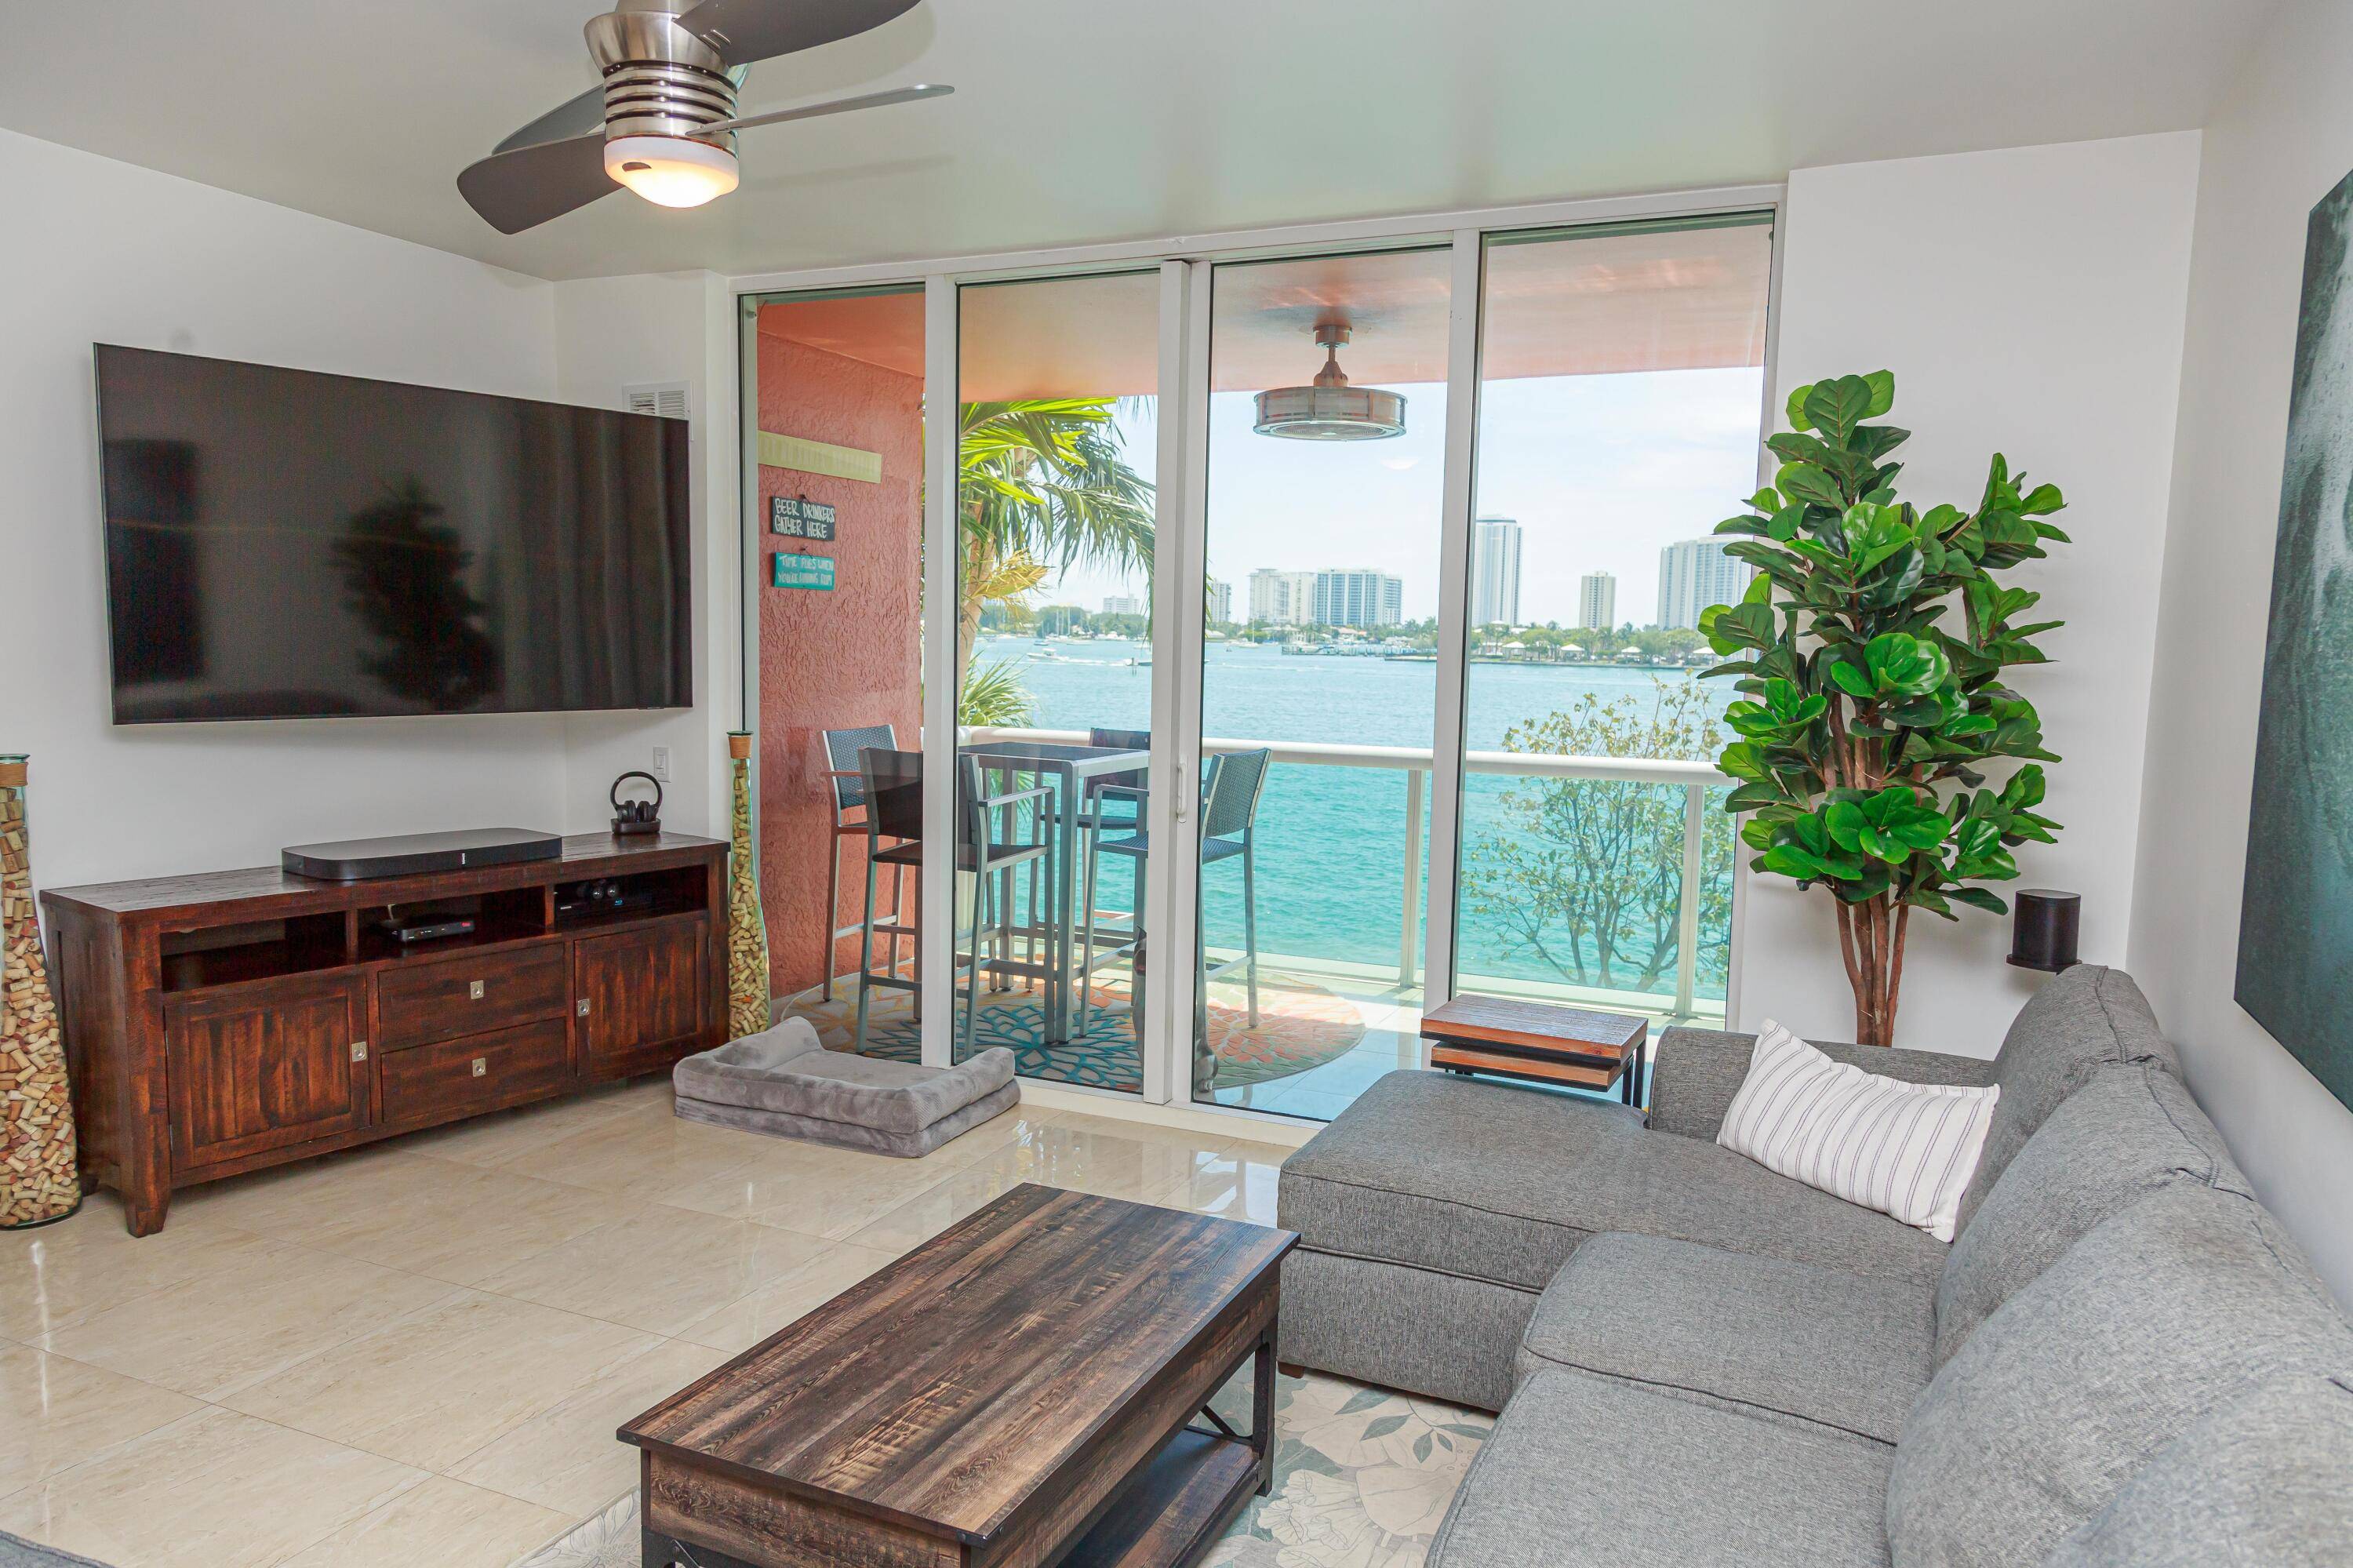 Enjoy the morning sunrises from this beautiful and conveniently located 2nd floor unit with direct intracoastal views.